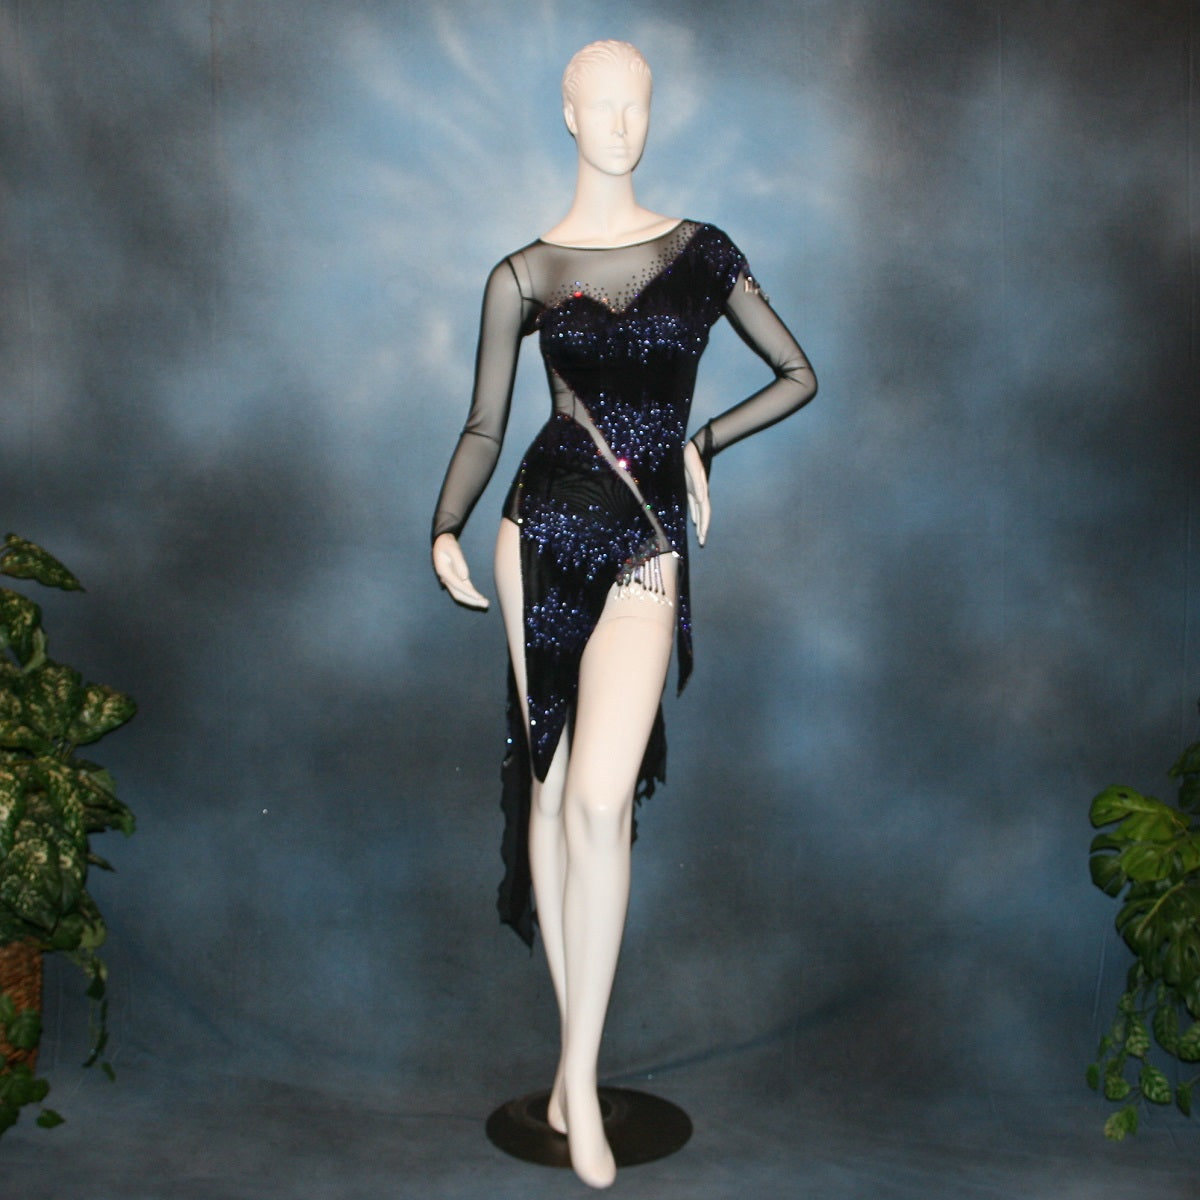 Crystal's Creations Latin/rhythm/tango dress created in black glitter slinky with an awesome electrifying tanzanite/perwinkle glitter pattern artistically placed on a black stretch mesh base